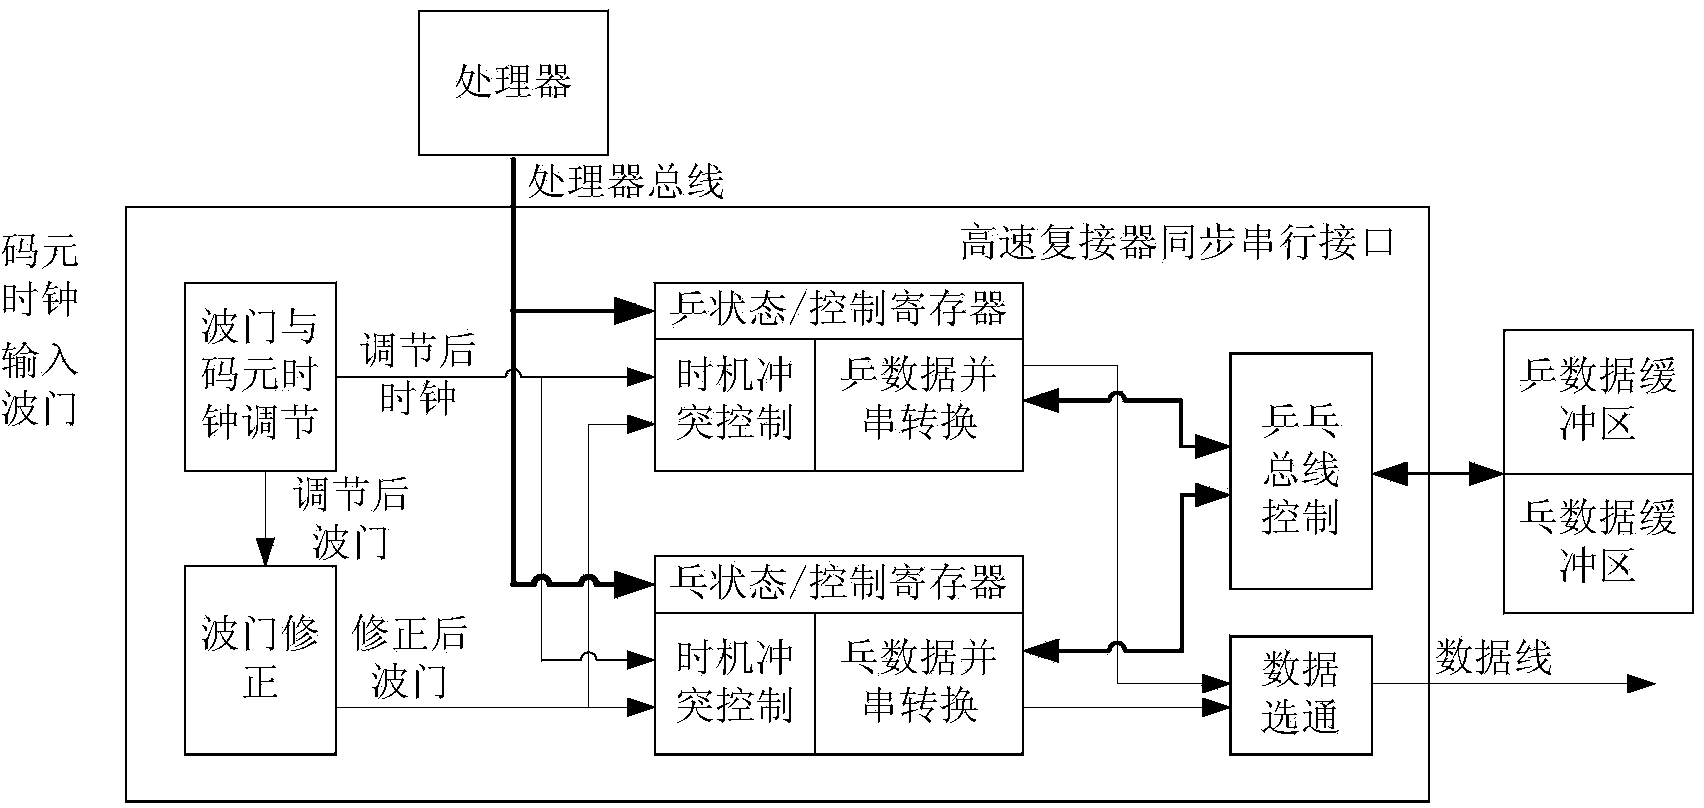 High-speed multiplexer synchronous serial interface design method for ping-pong anti-collision